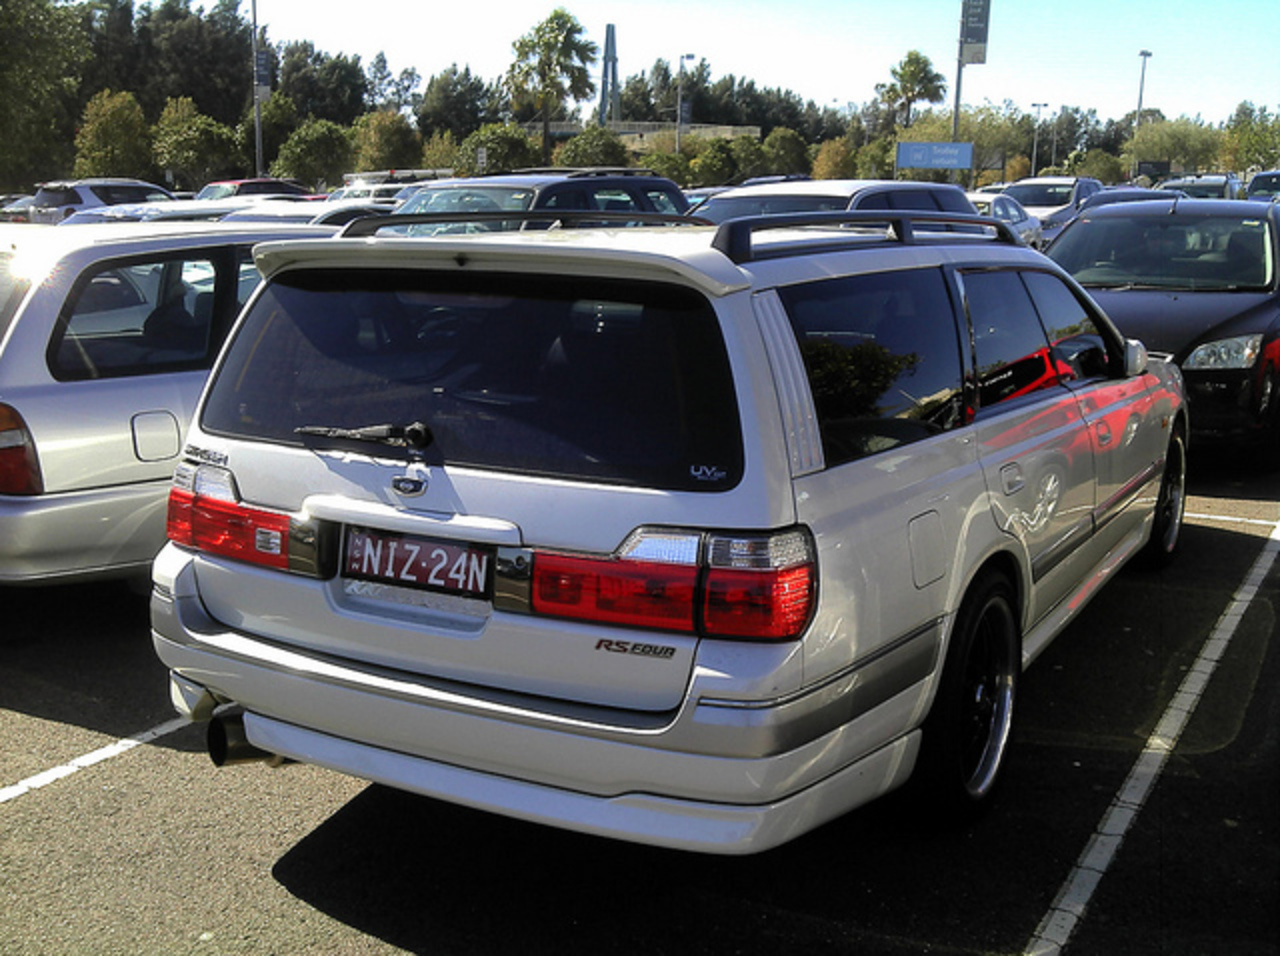 1996 Nissan Stagea RS Four Wagon | Flickr - Photo Sharing!